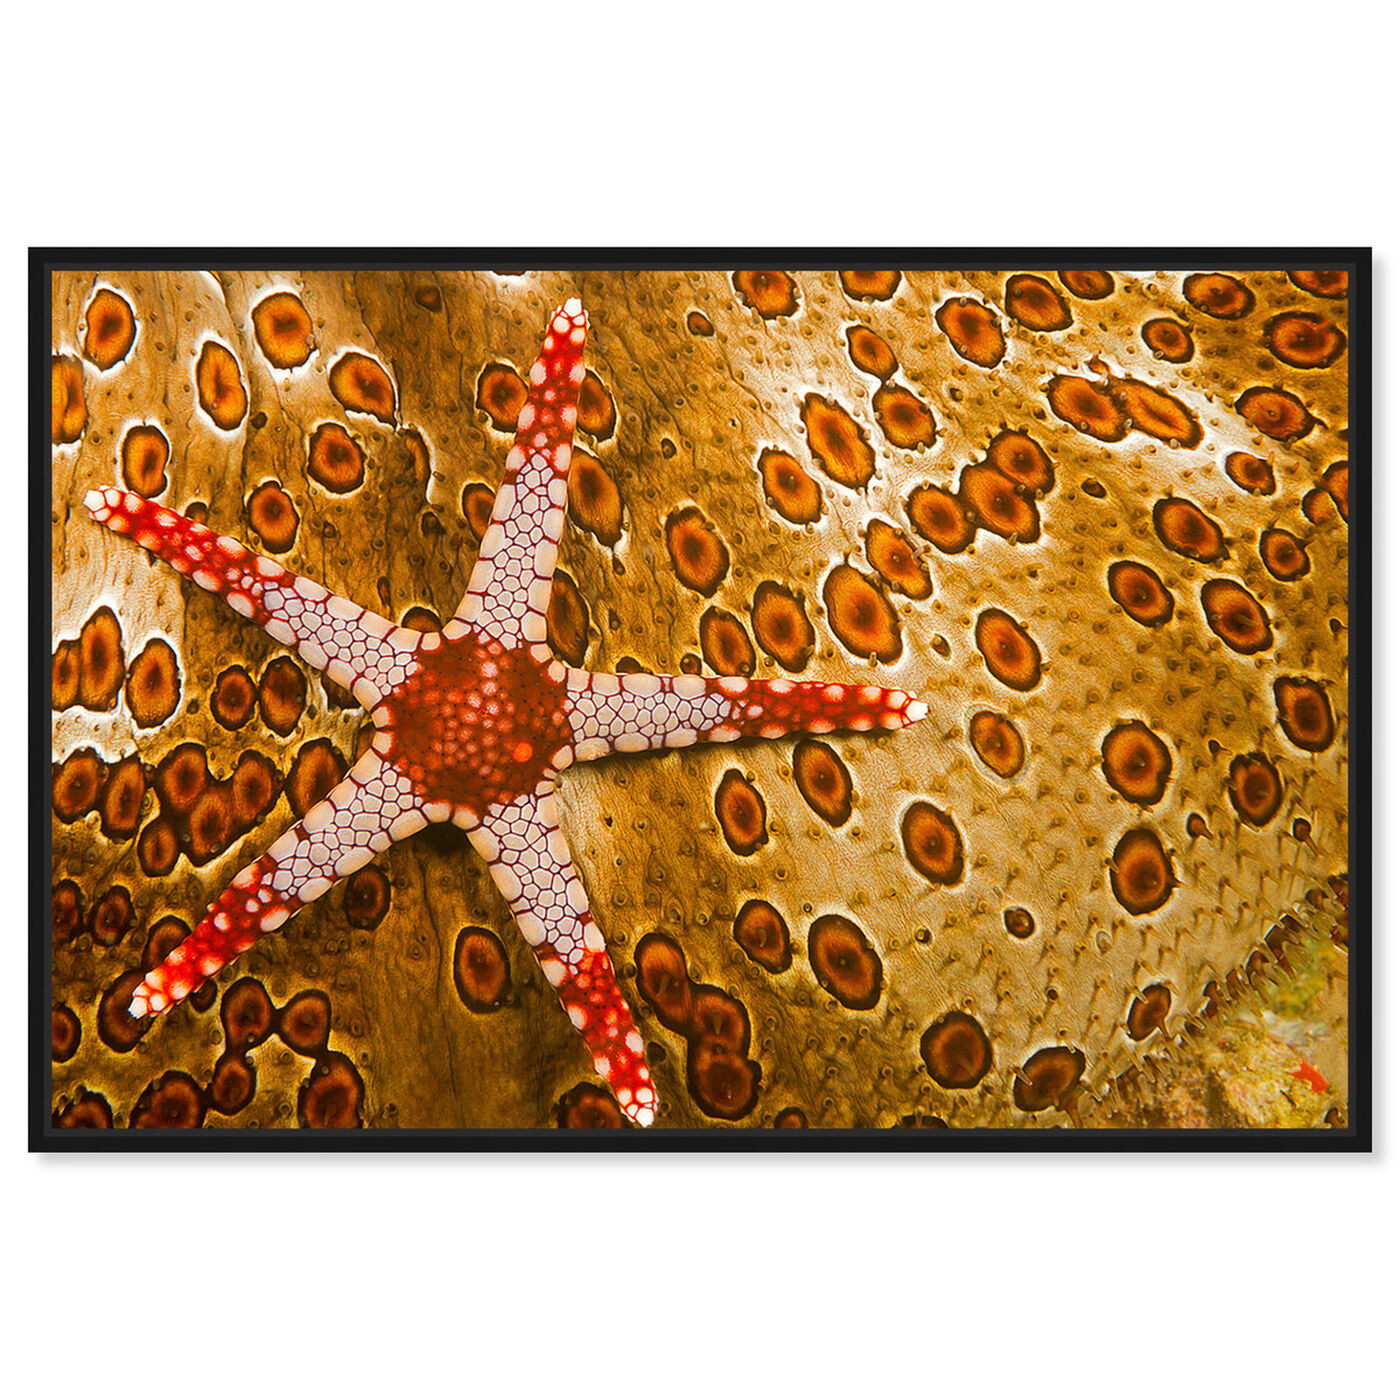 Front view of Sea Star on Sea Cucumber by David Fleetham featuring nautical and coastal and marine life art.